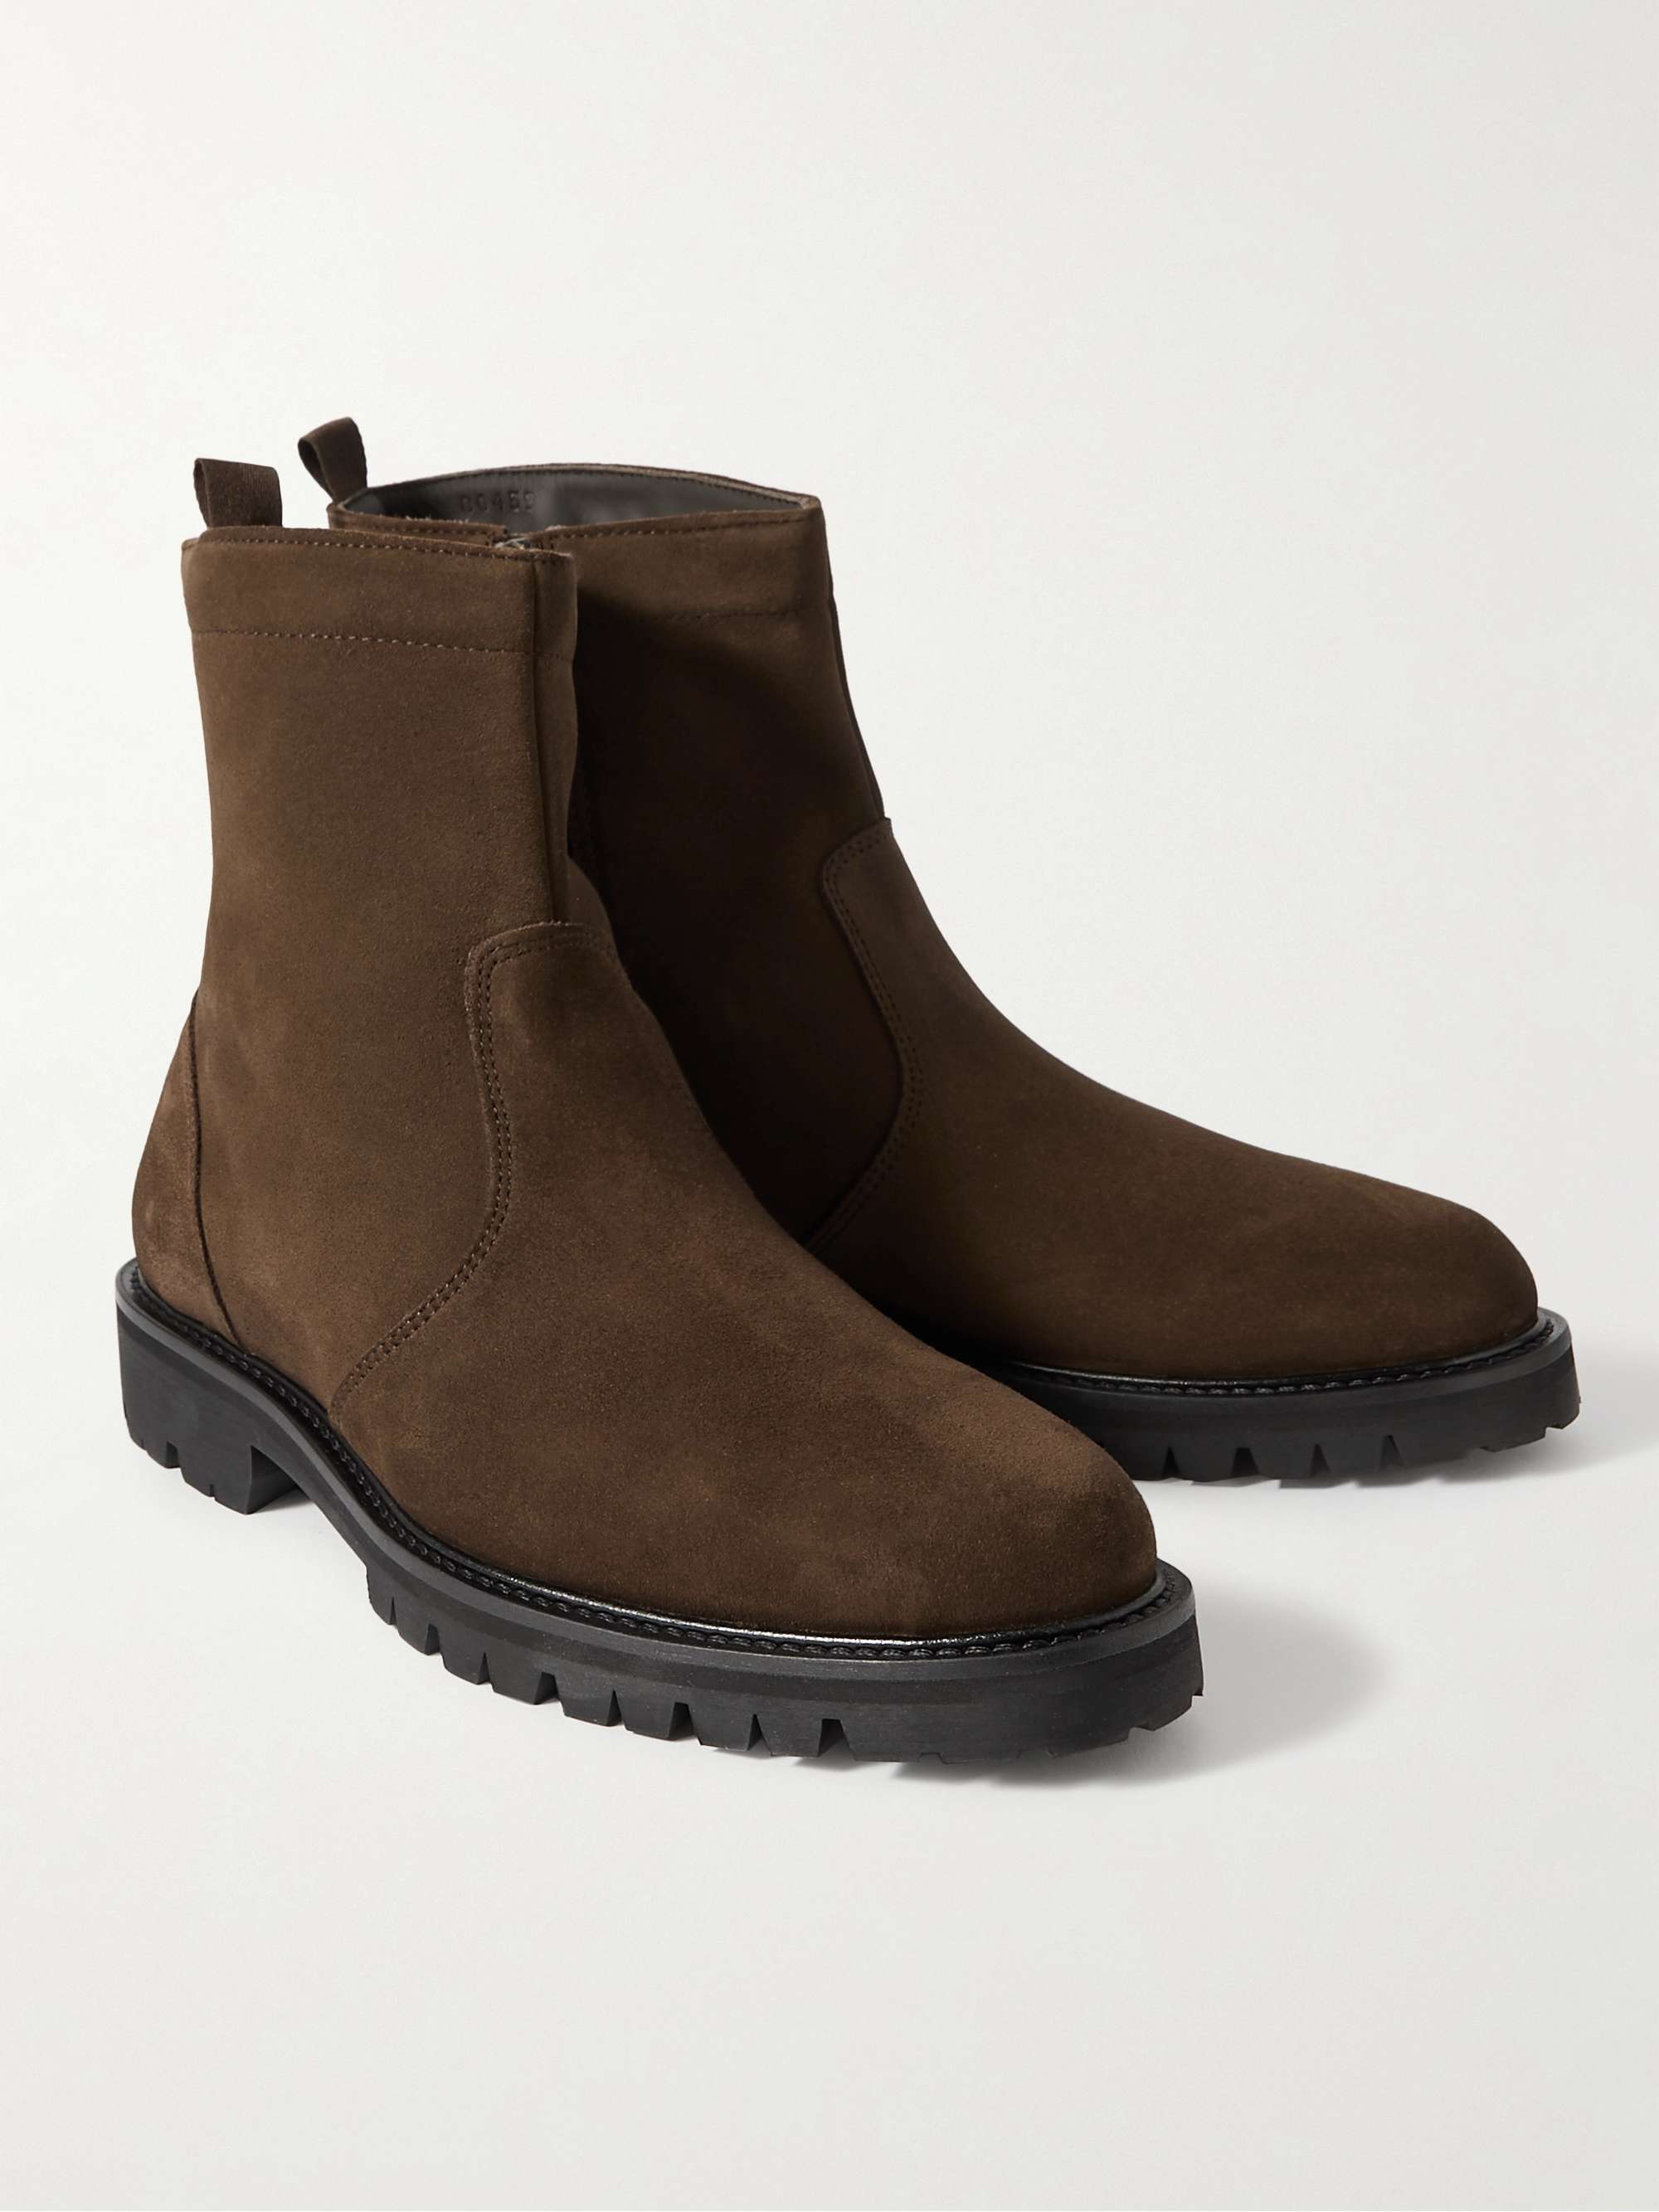 MR P. Olie Shearling-Lined Suede Boots